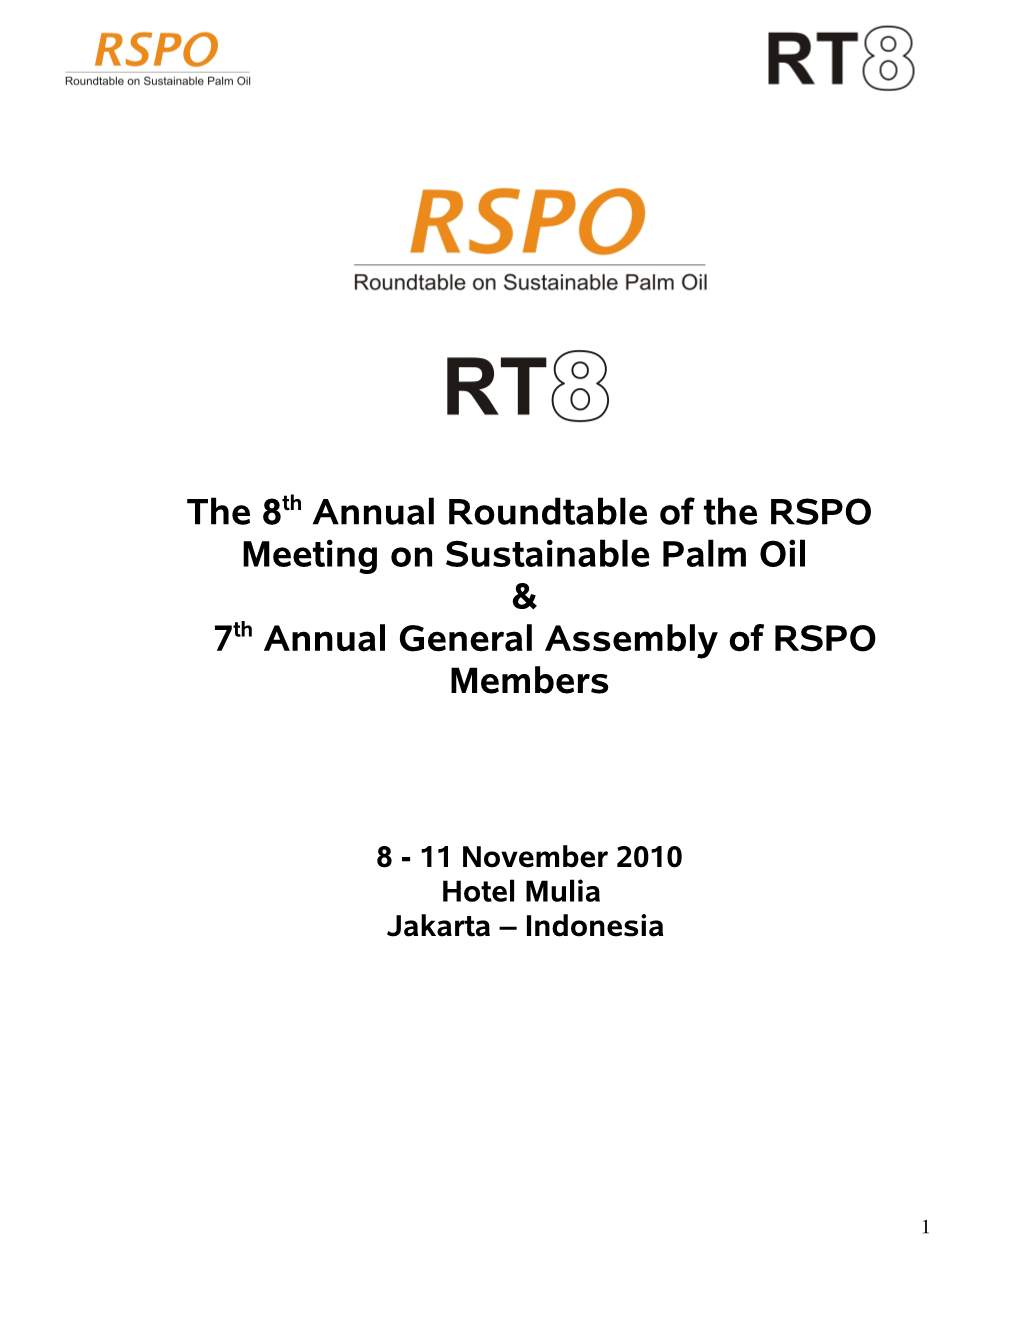 The 8Th Annual Roundtable of the RSPO Meeting on Sustainable Palm Oil & 7Th Annual General Assembly of RSPO Members